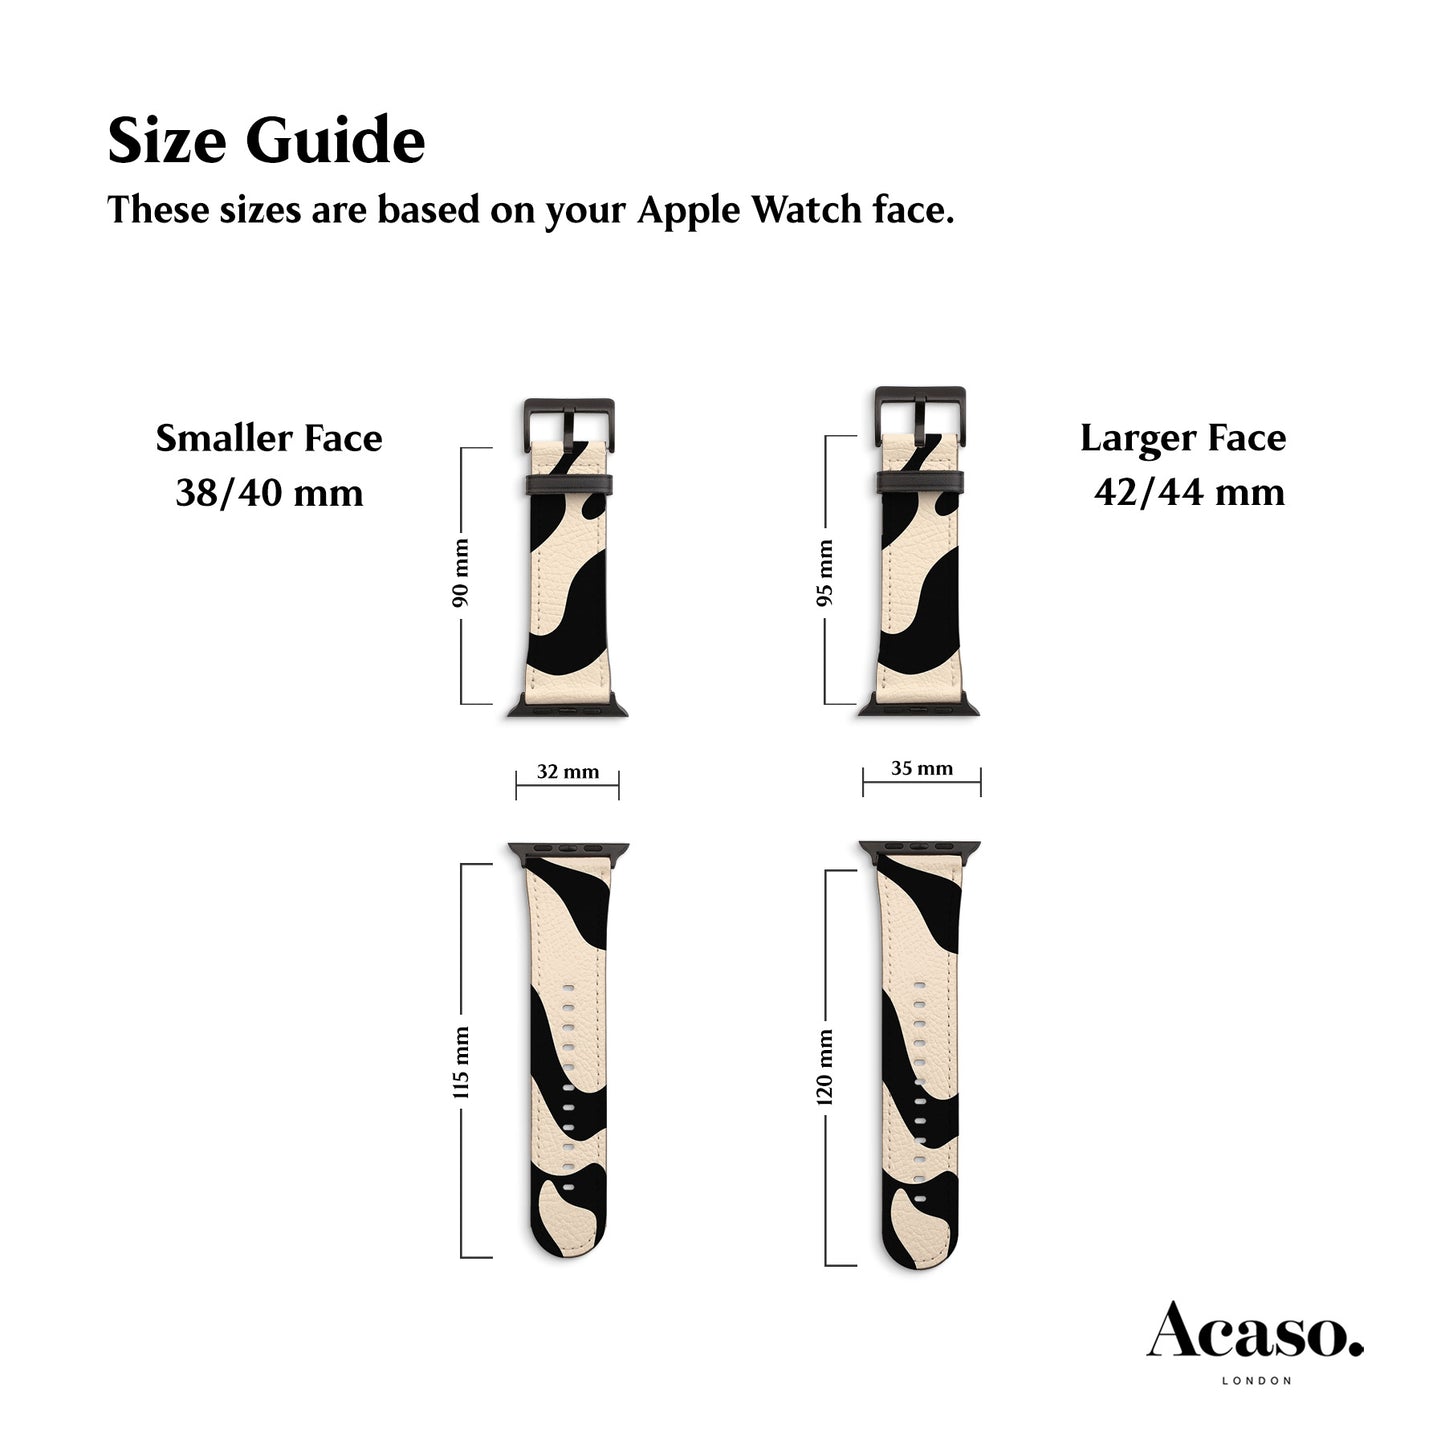 ABSTRACT WAVY Black Apple Watch Strap